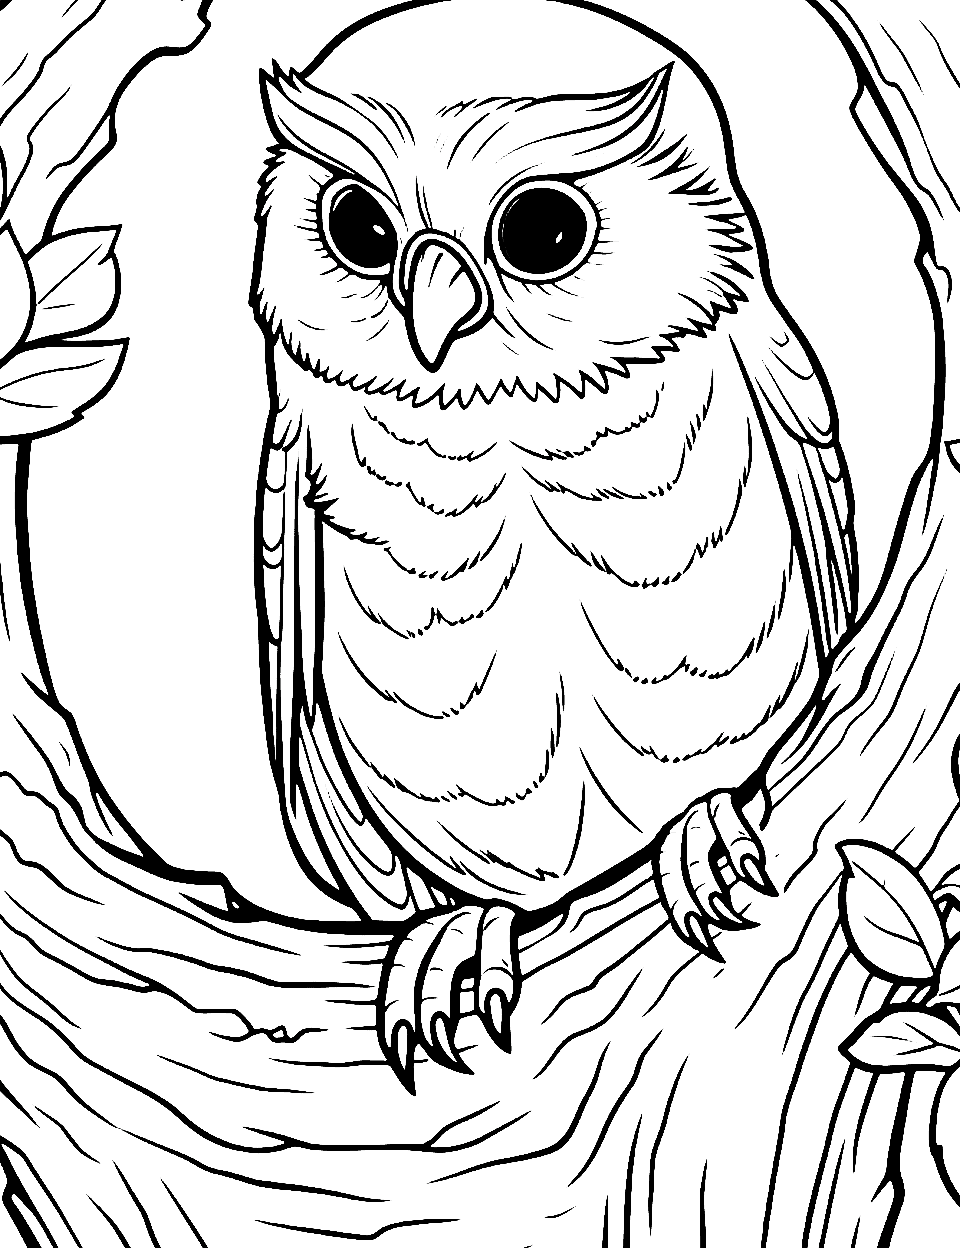 Owl's Cozy Hollow Coloring Page - An owl snugly settled in its tree hollow.